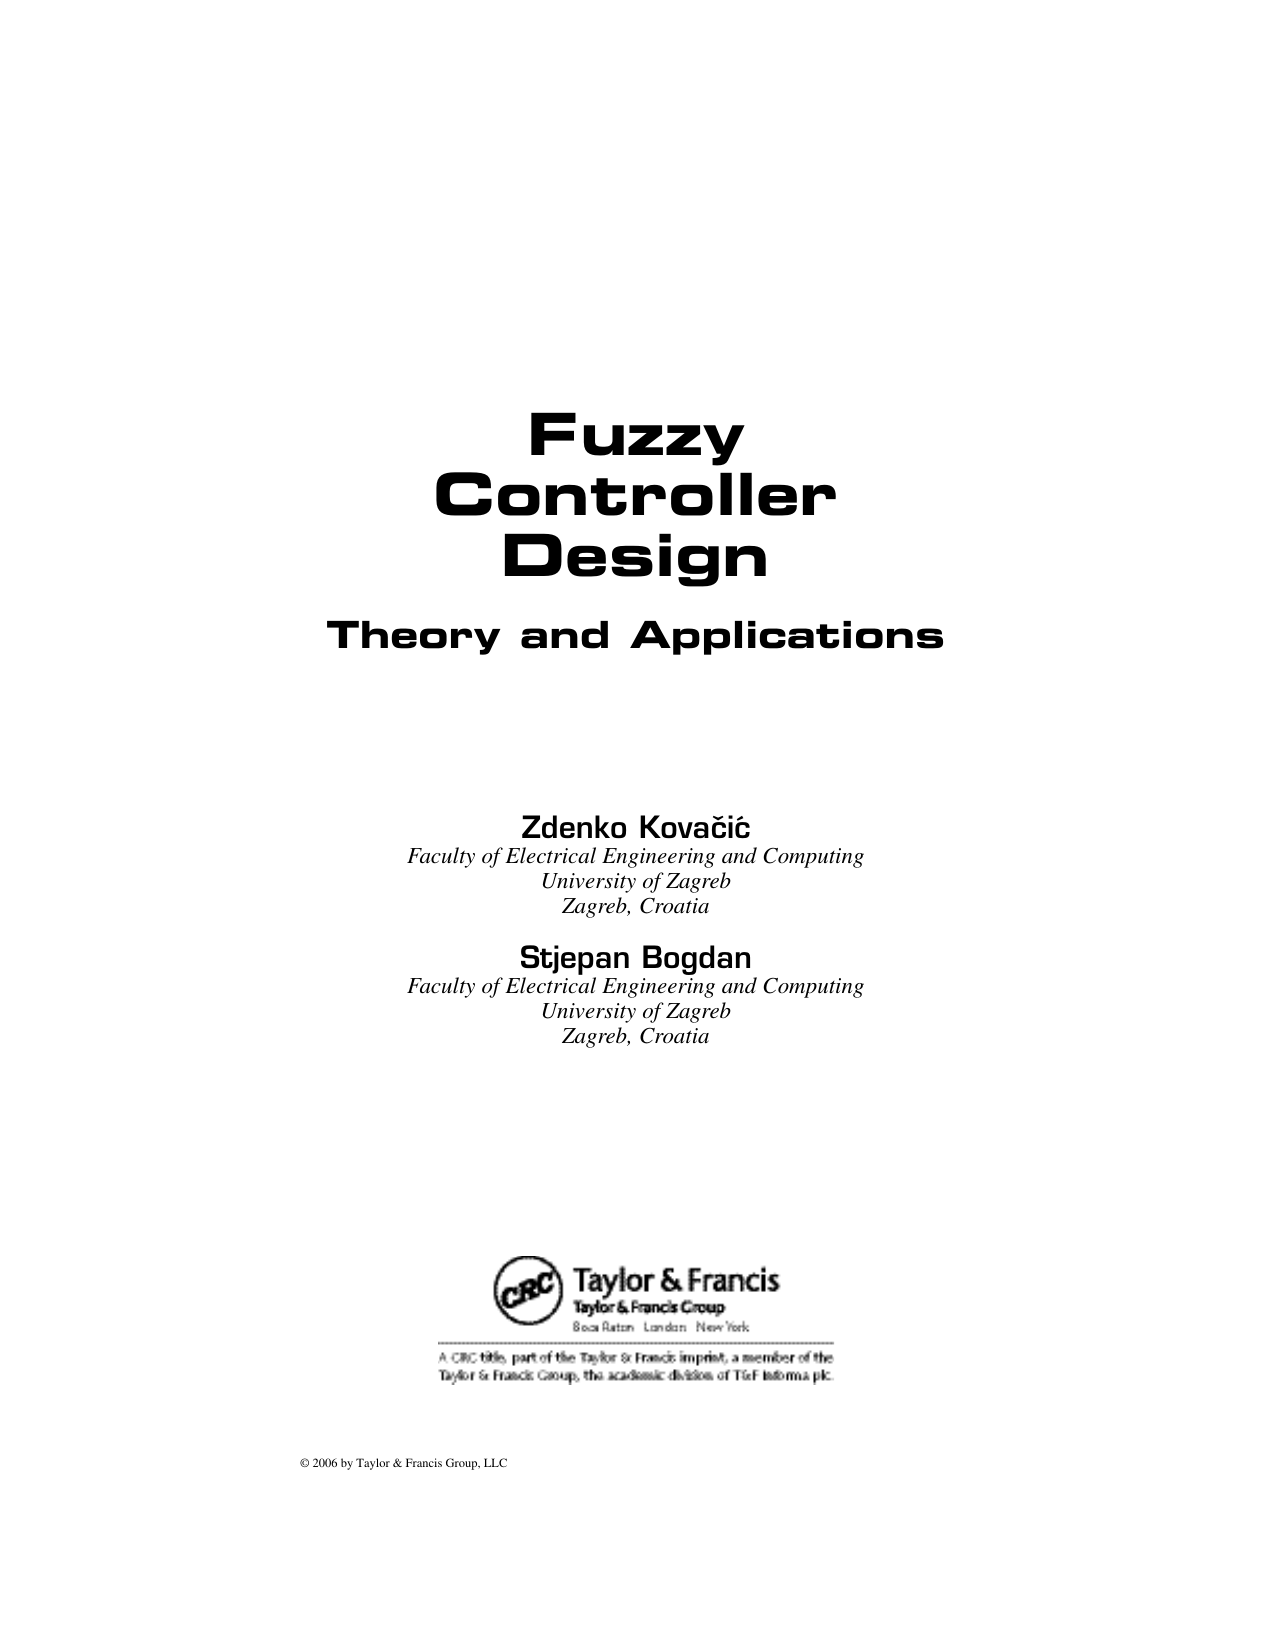 Fuzzy Controller Design Theory And Applications Automation And Control Engineering By Zdenko Kovacic Stjepan Bogdan Z Lib Org 1